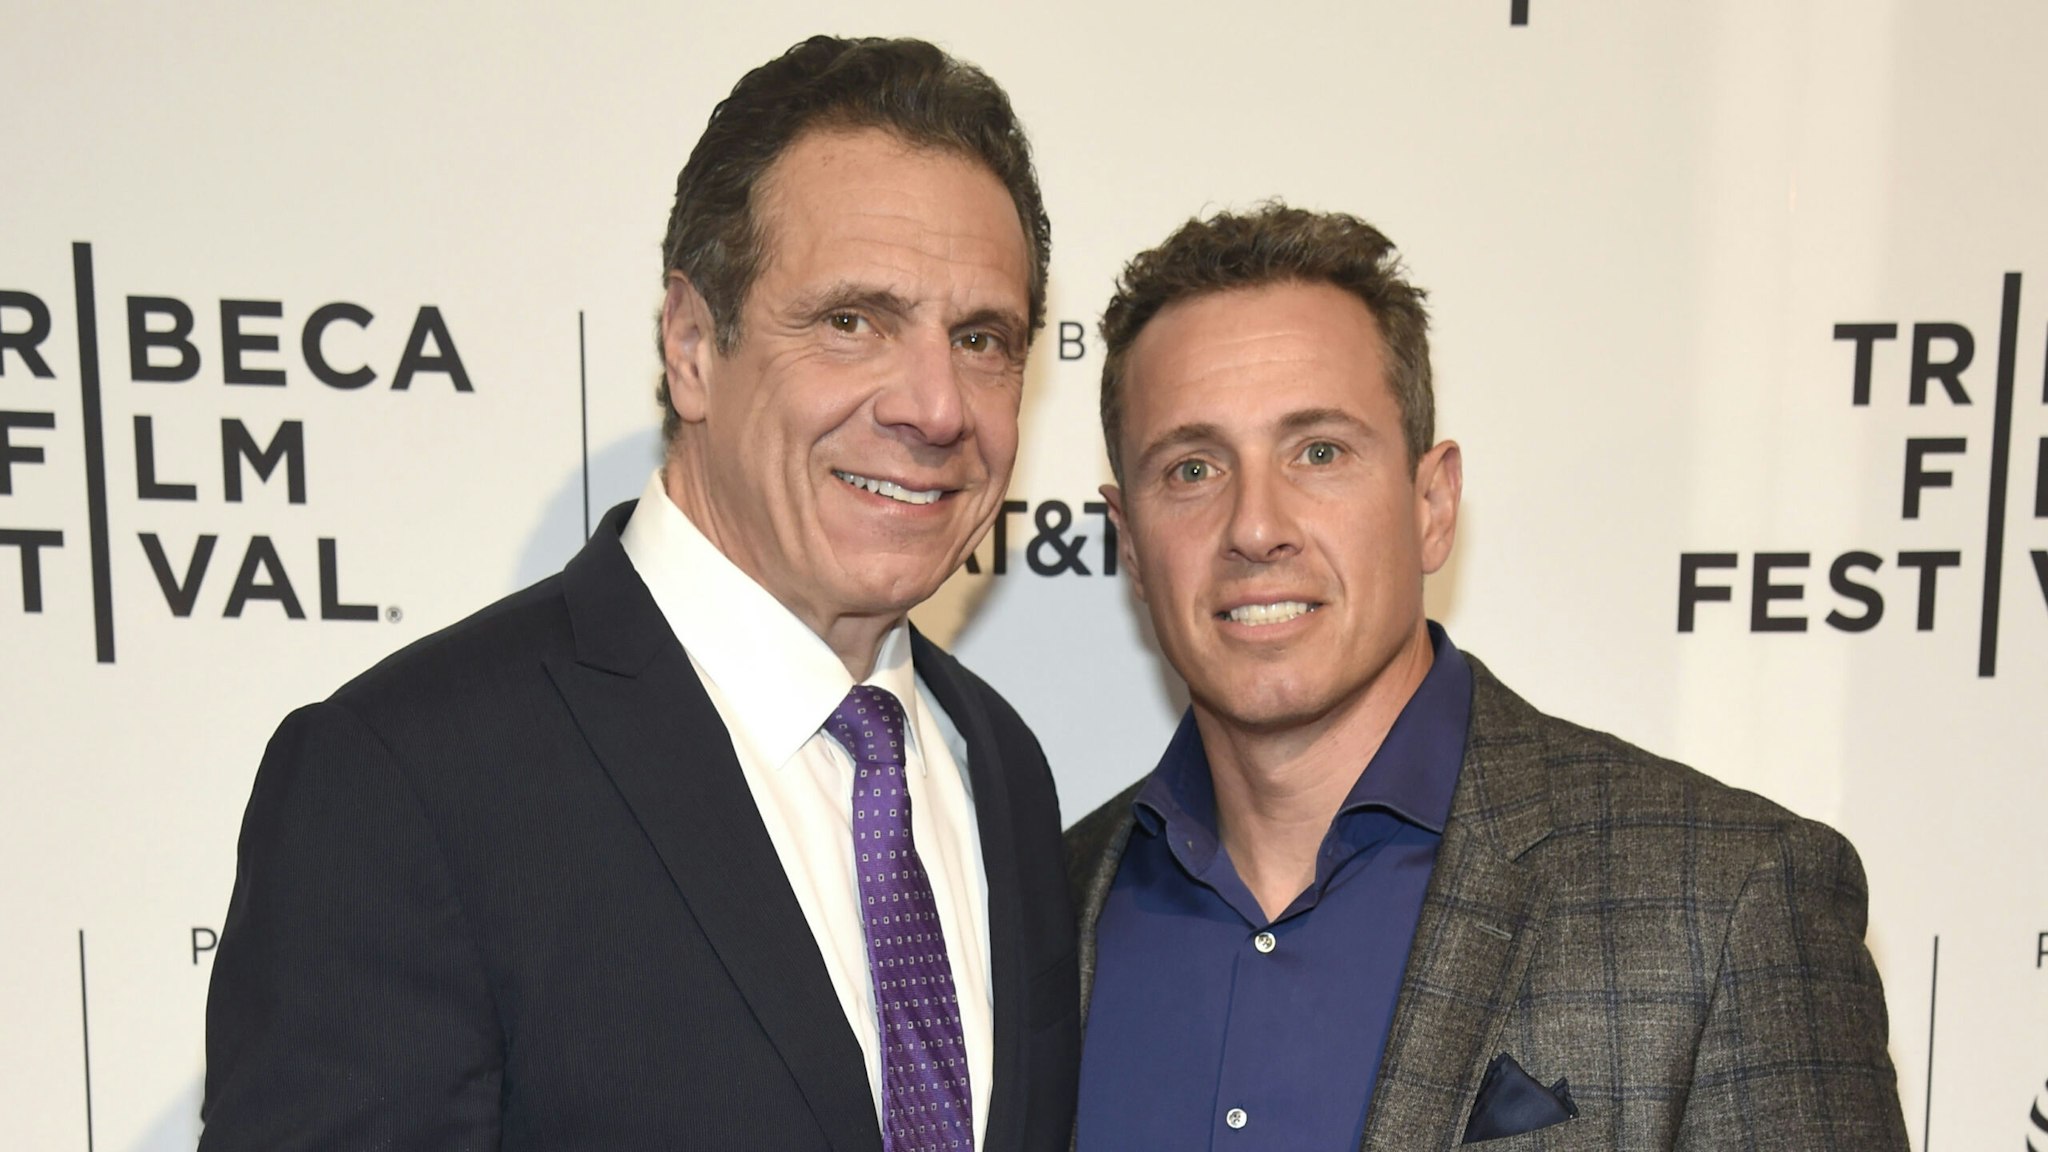 NEW YORK, NY - APRIL 26: New York Governor Andrew Cuomo and Chris Cuomo attend the HBO Documentary Film "RX: Early Detection A Cancer Journey With Sandra Lee" during The Tribeca Film Festival at SVA Theater on April 26, 2018 in New York City.